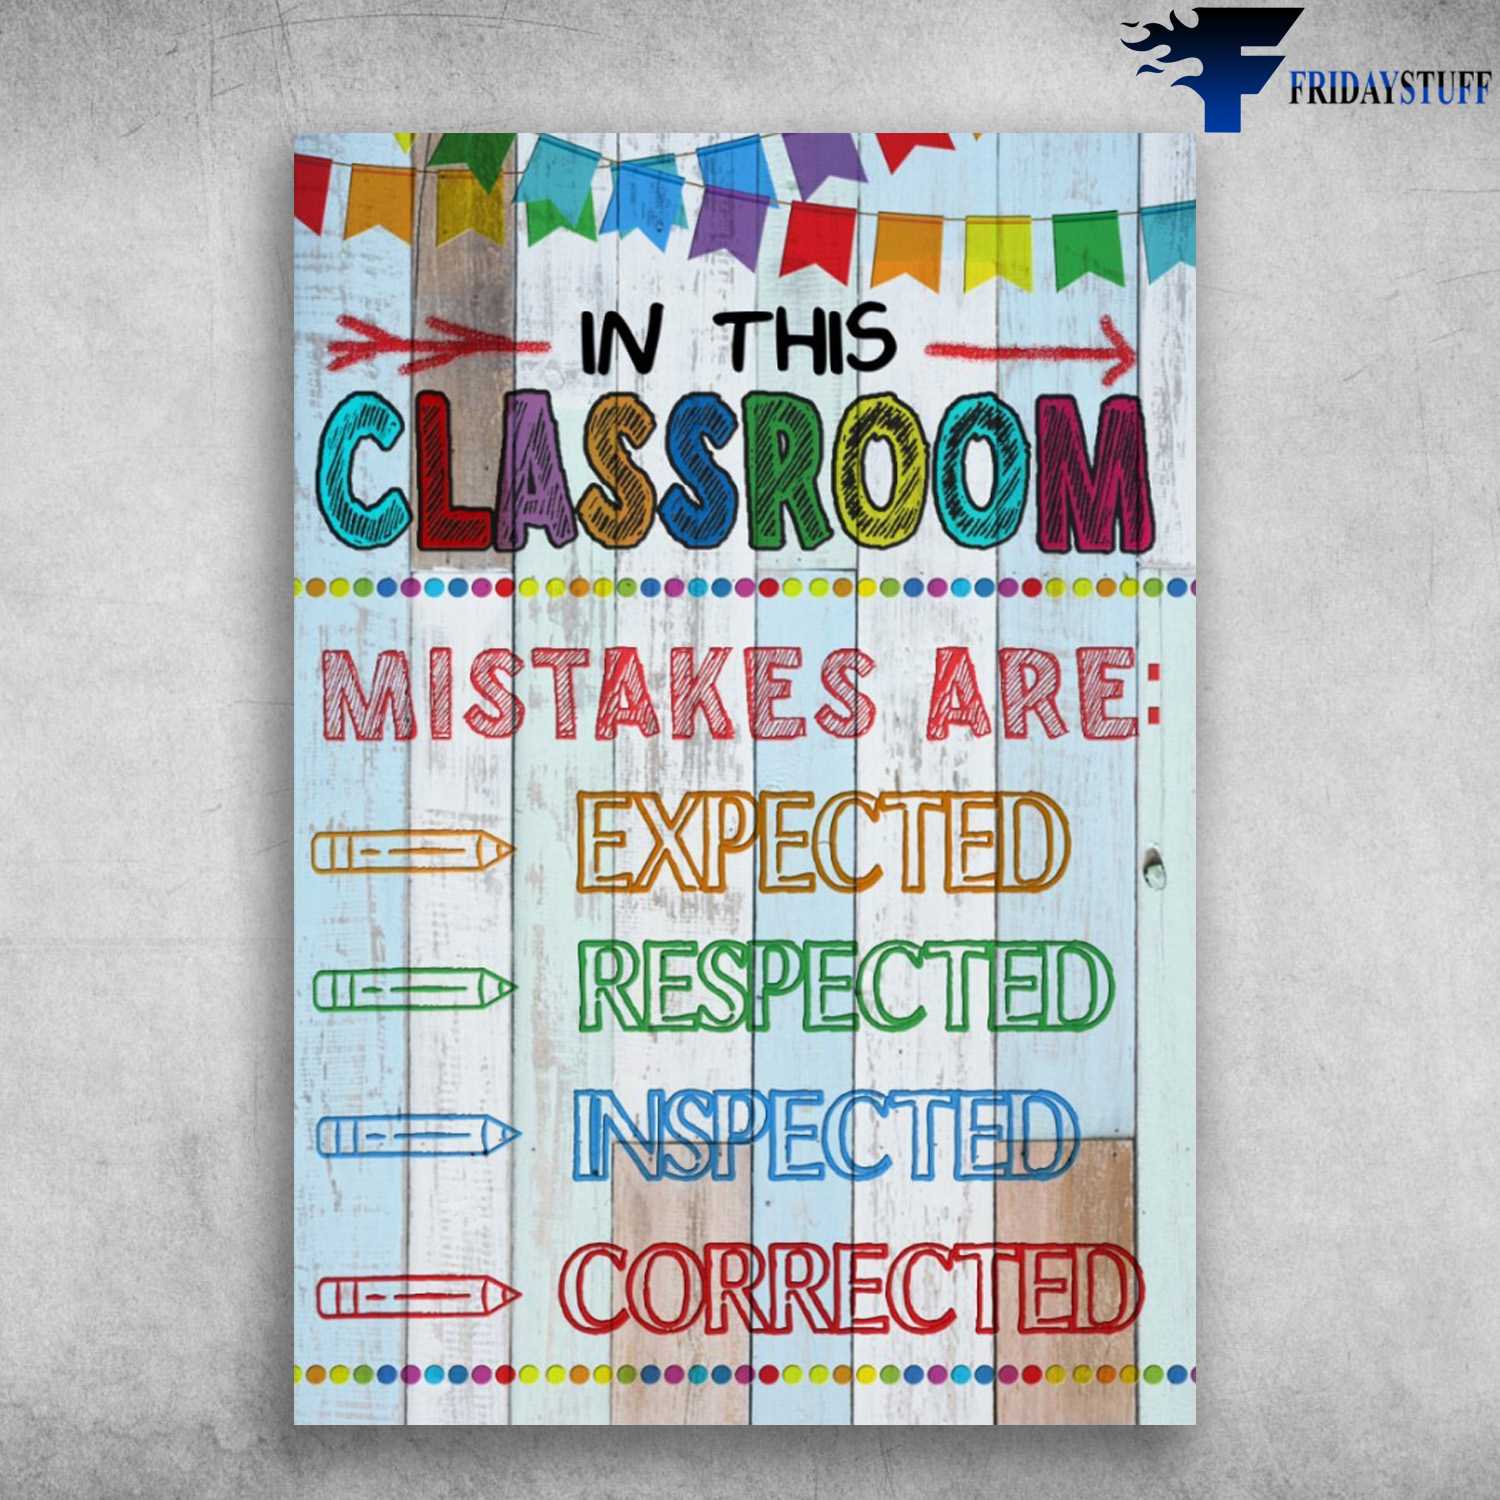 Classroom Rules - In This Classroom, Mistakes Are Expected, Respected, Inspected, Corrected